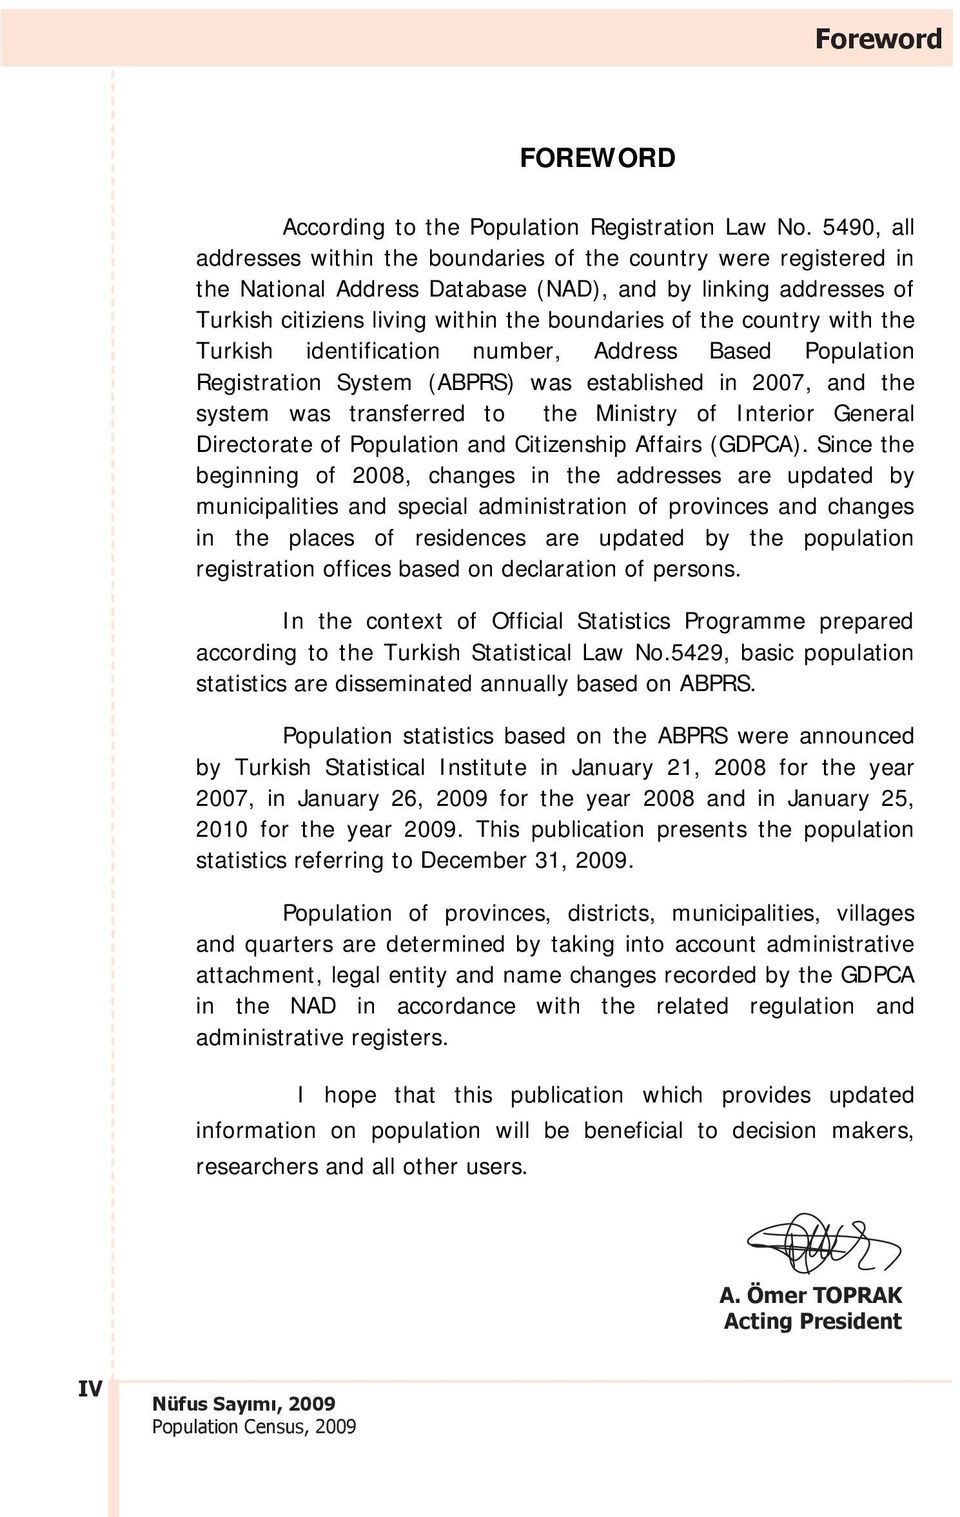 country with the Turkish identification number, Address Based Population Registration System (ABPRS) was established in 2007, and the system was transferred to the Ministry of Interior General